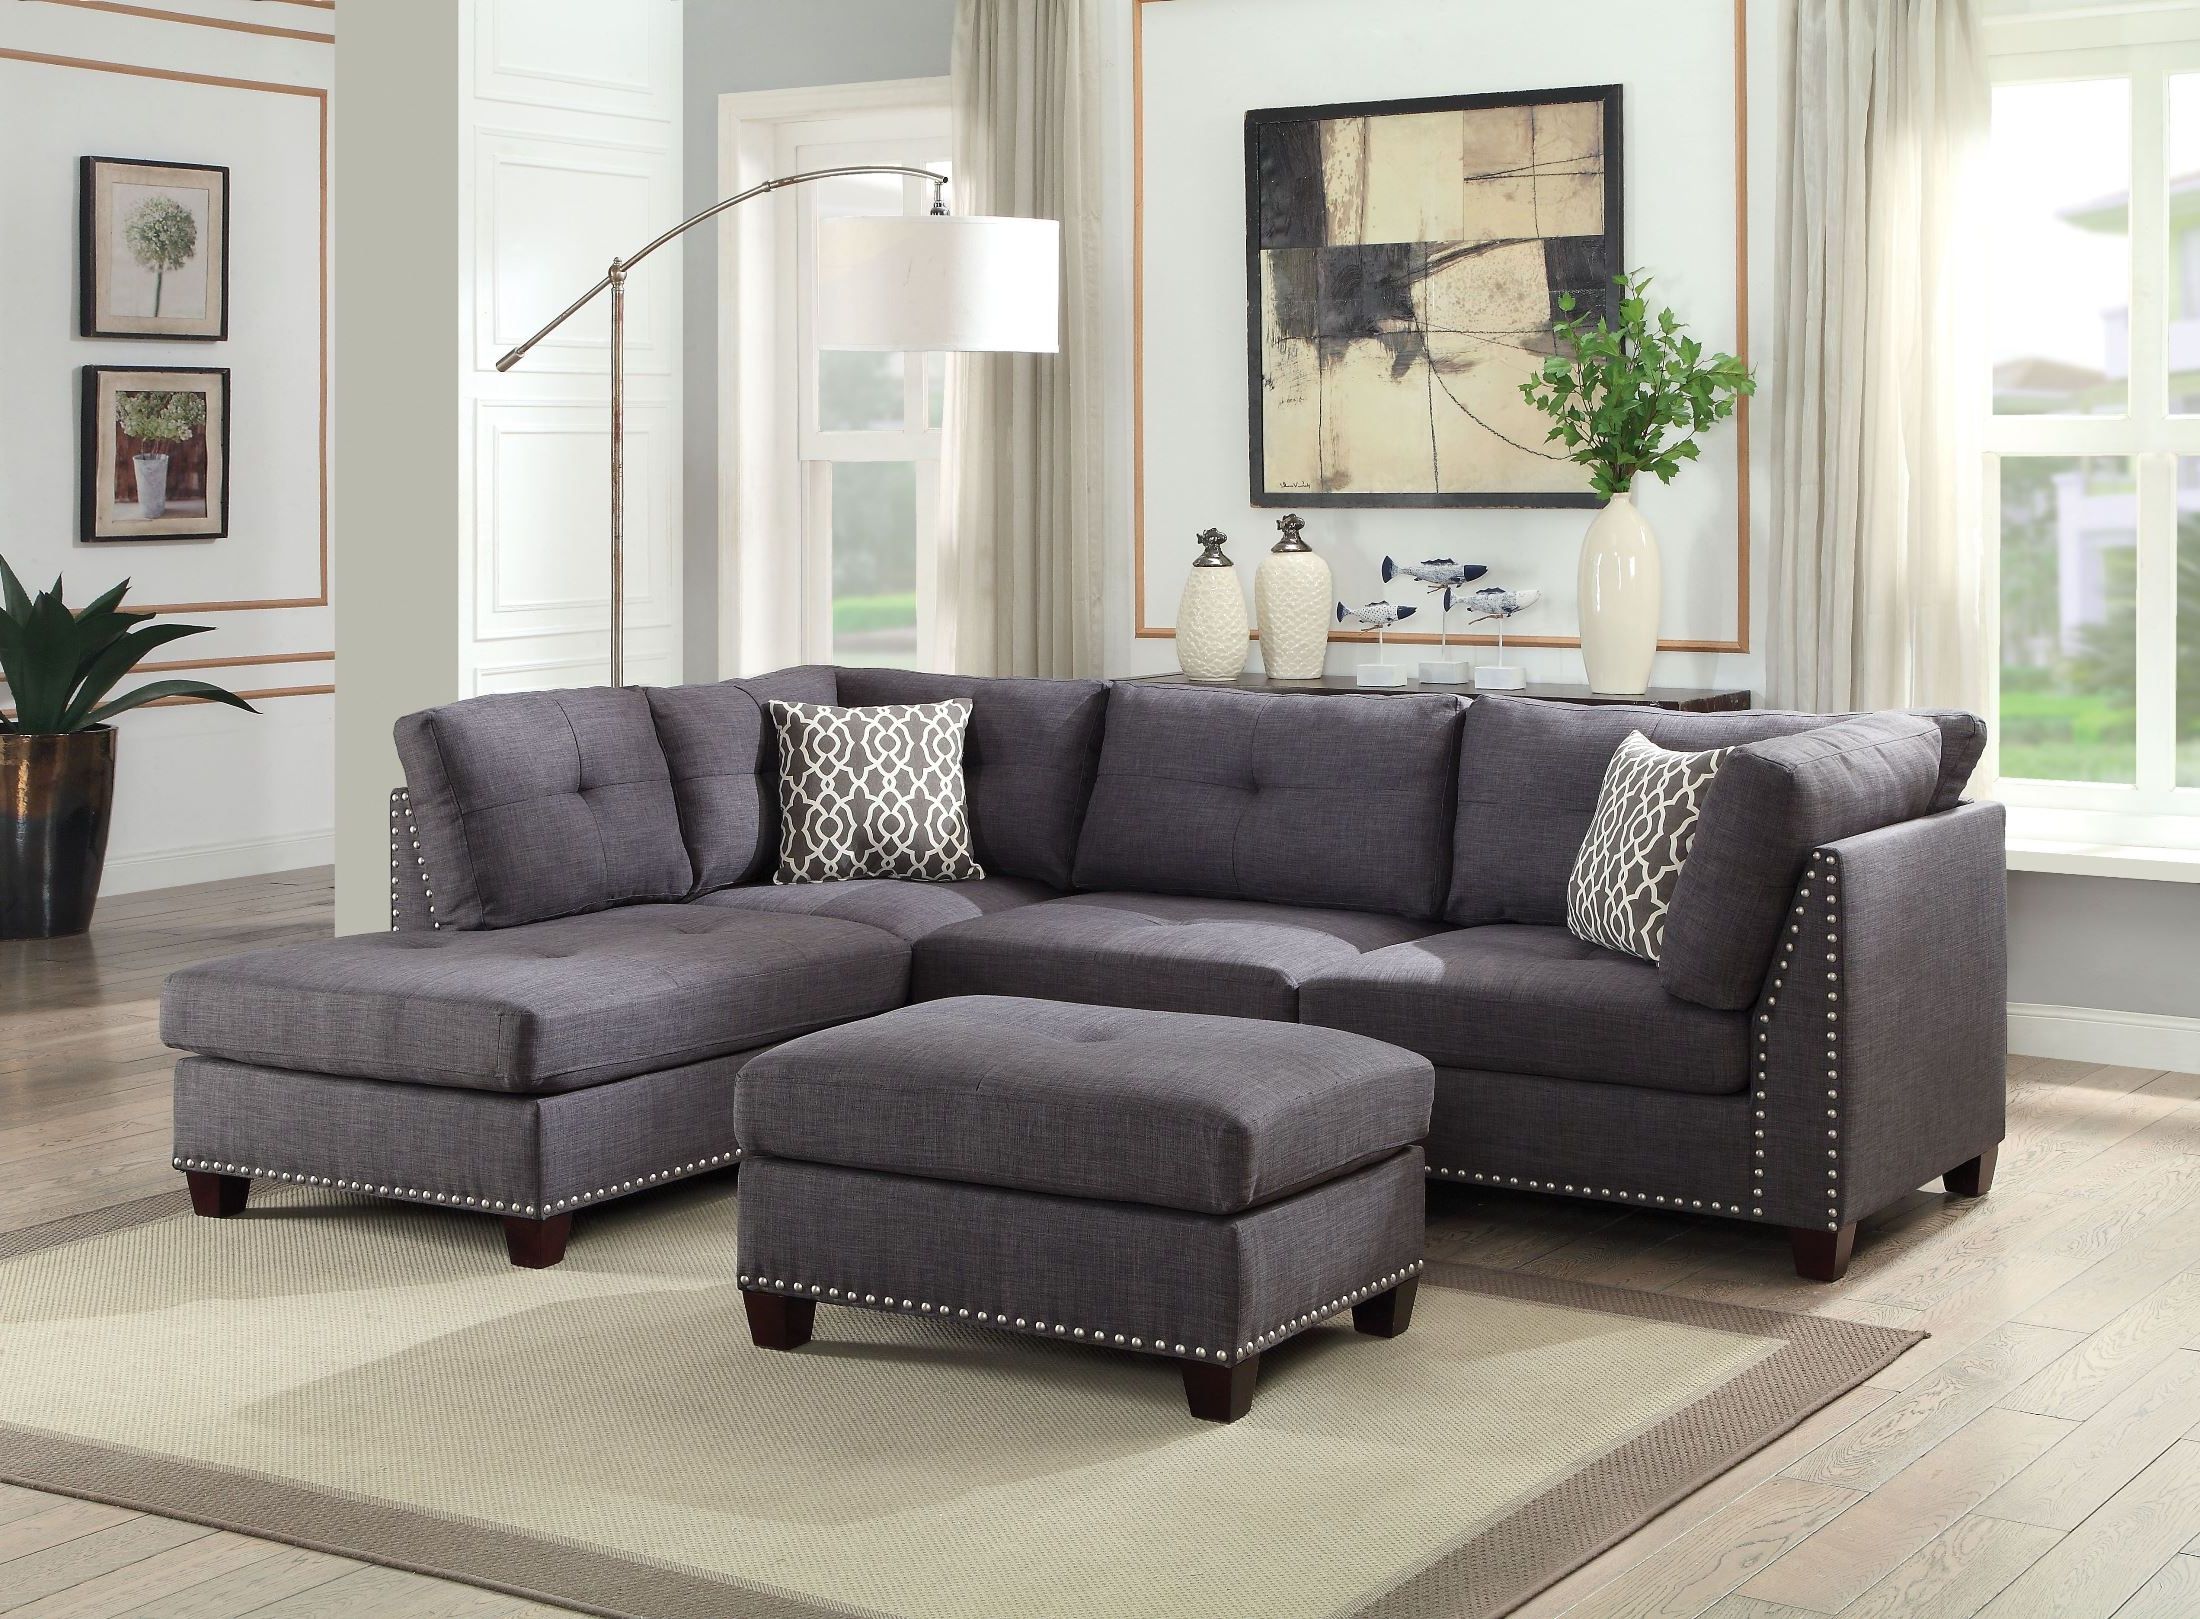 Acme Laurissa Light Charcoal Linen Sectional Sofa With Ottoman In Light Charcoal Linen Sofas (Gallery 1 of 20)